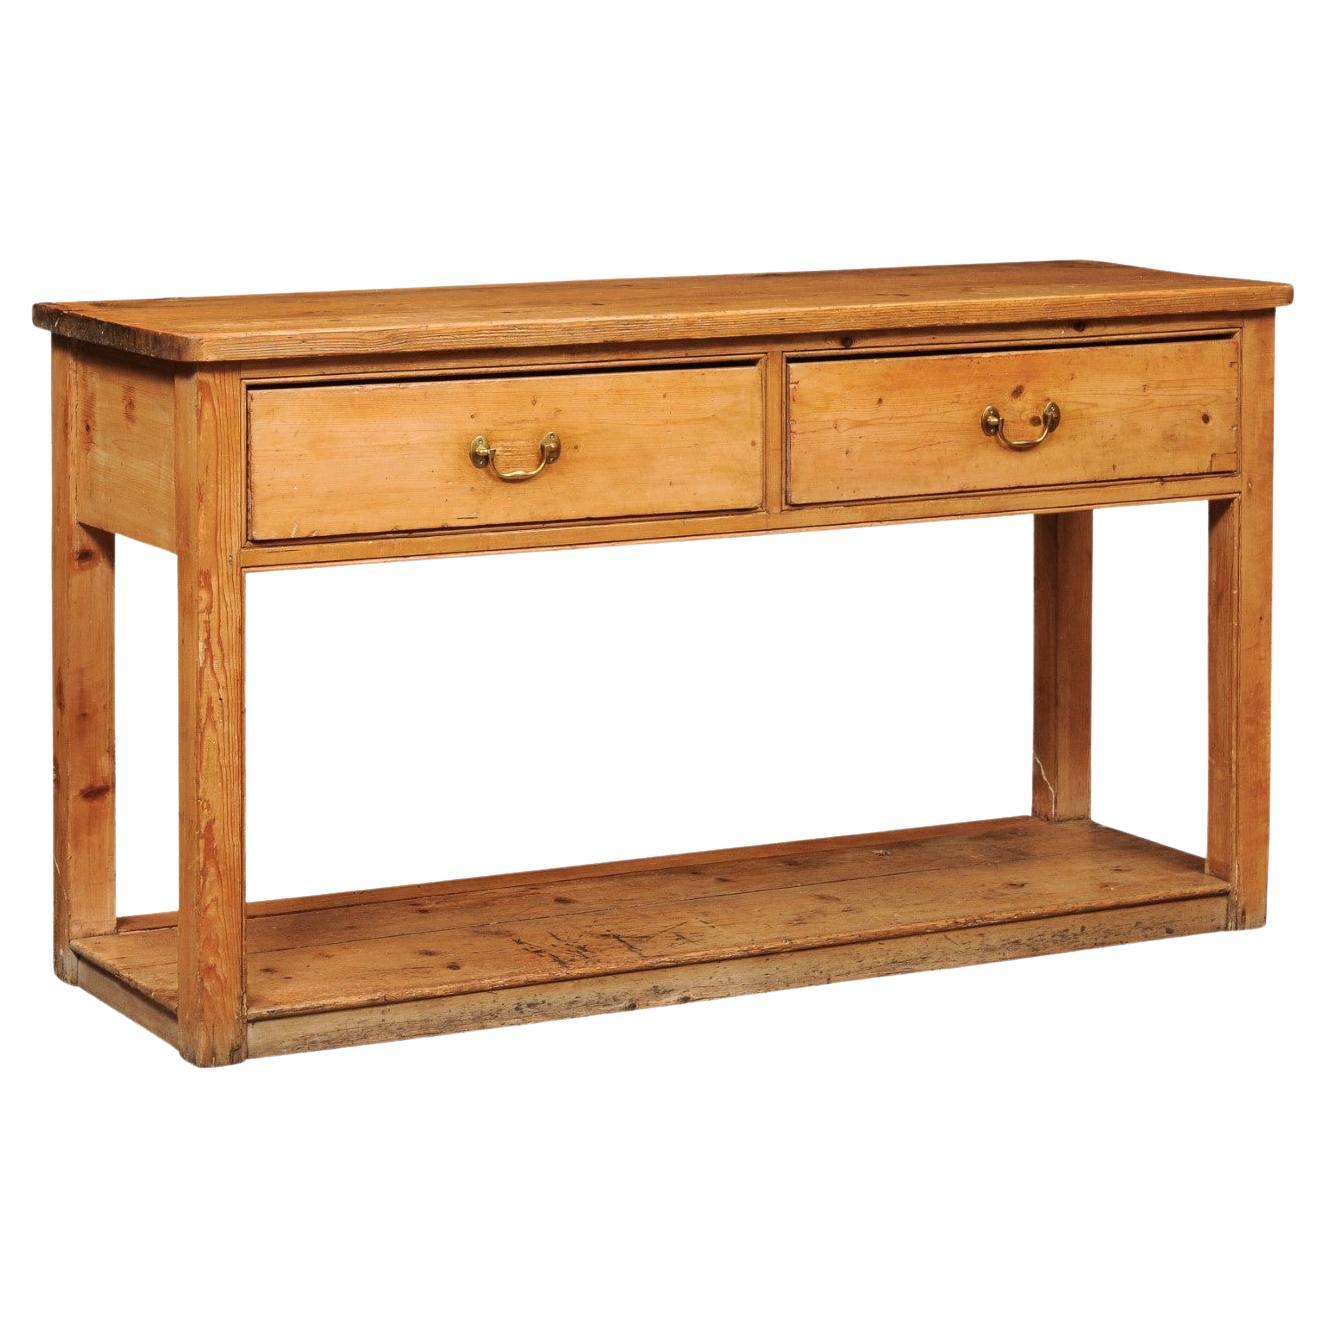 19th Century English Pine Server with 2 Drawers and Lower Plinth Base